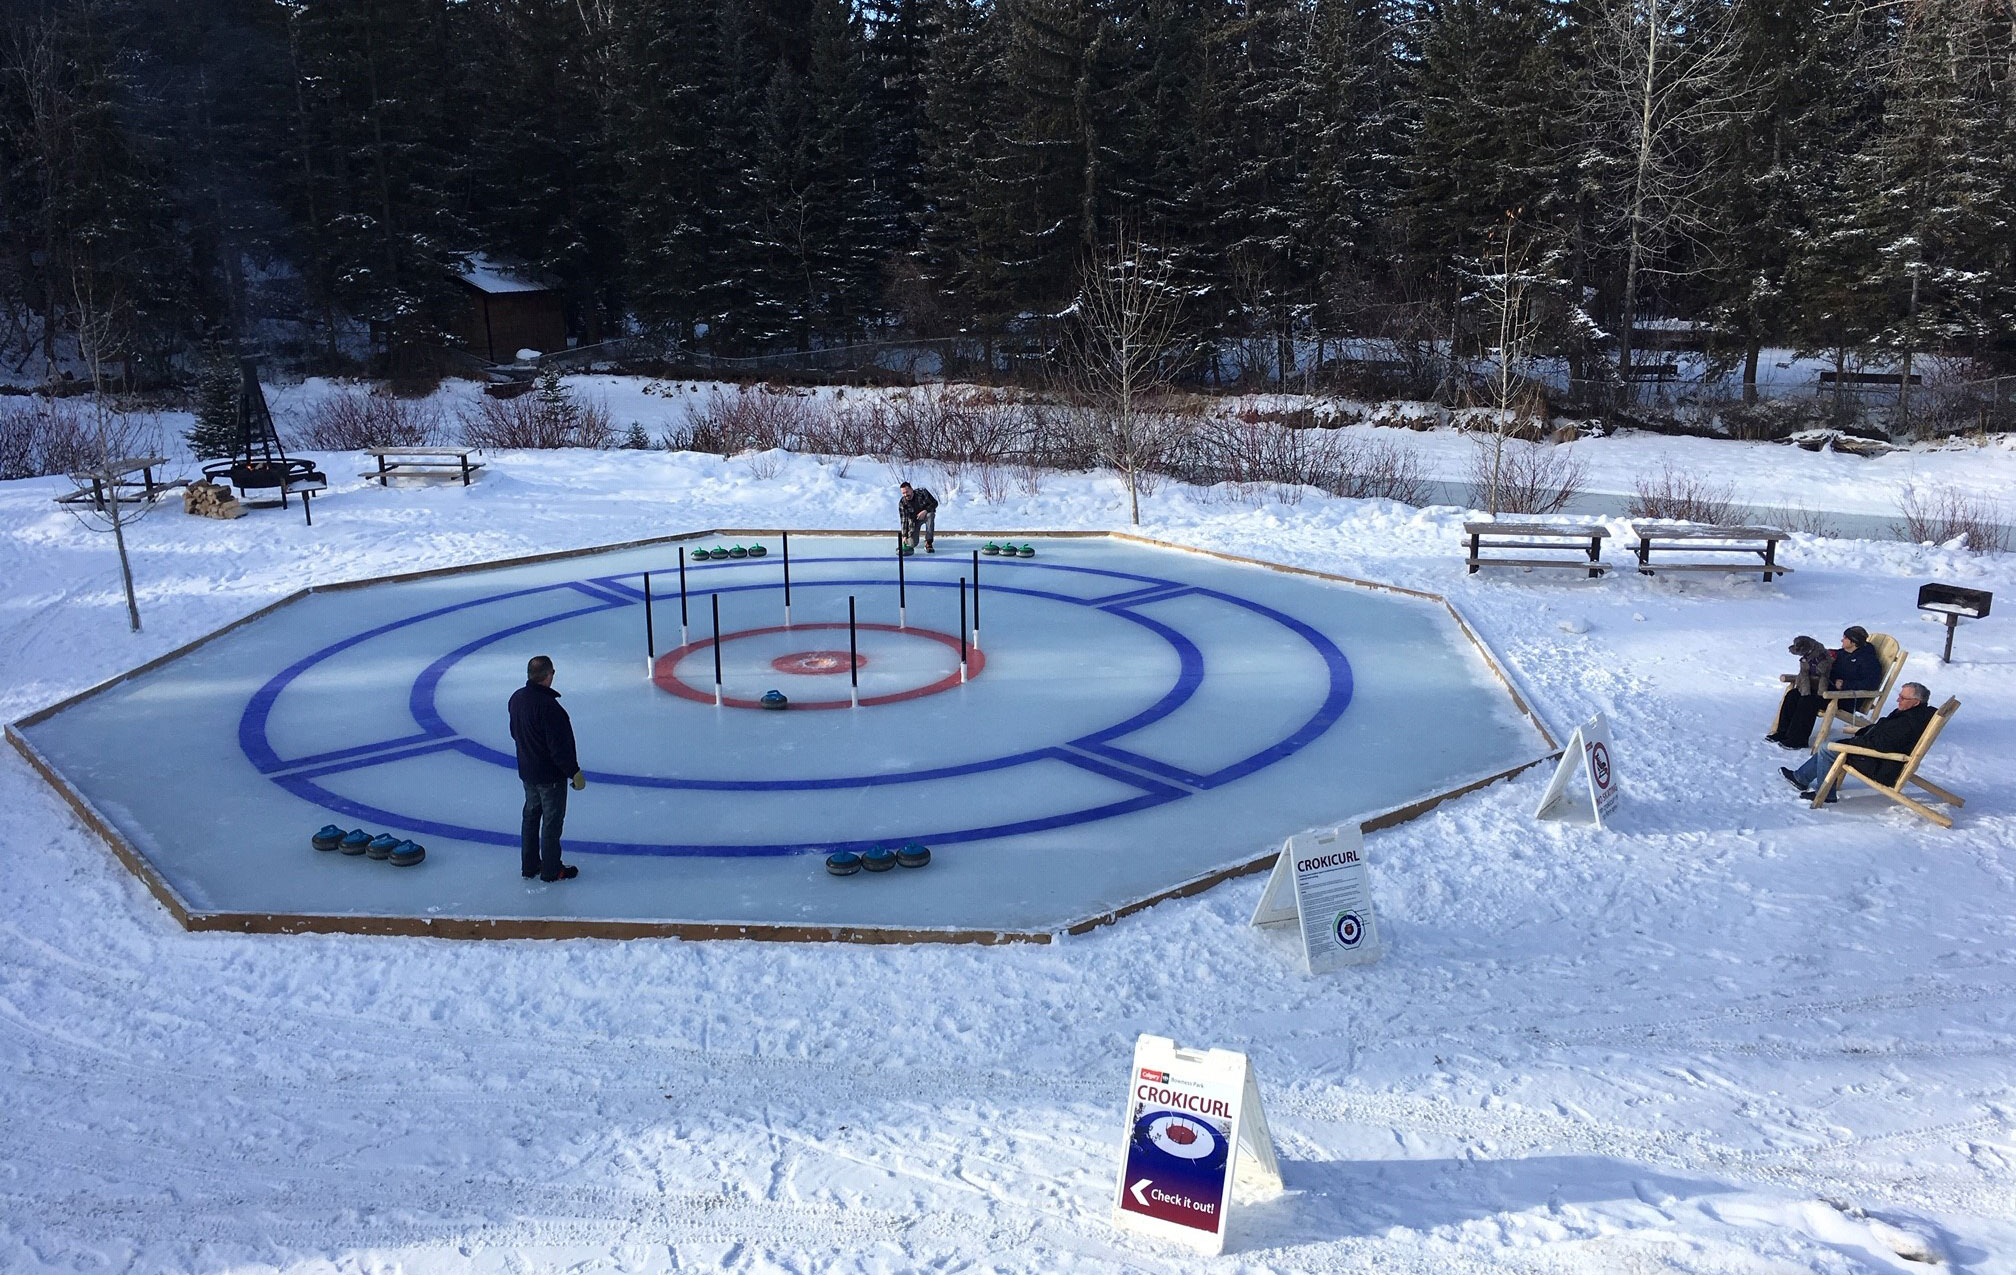 People try crokicurl at Bowness Park in Calgary. Try this interesting winter activity this year in Calgary!